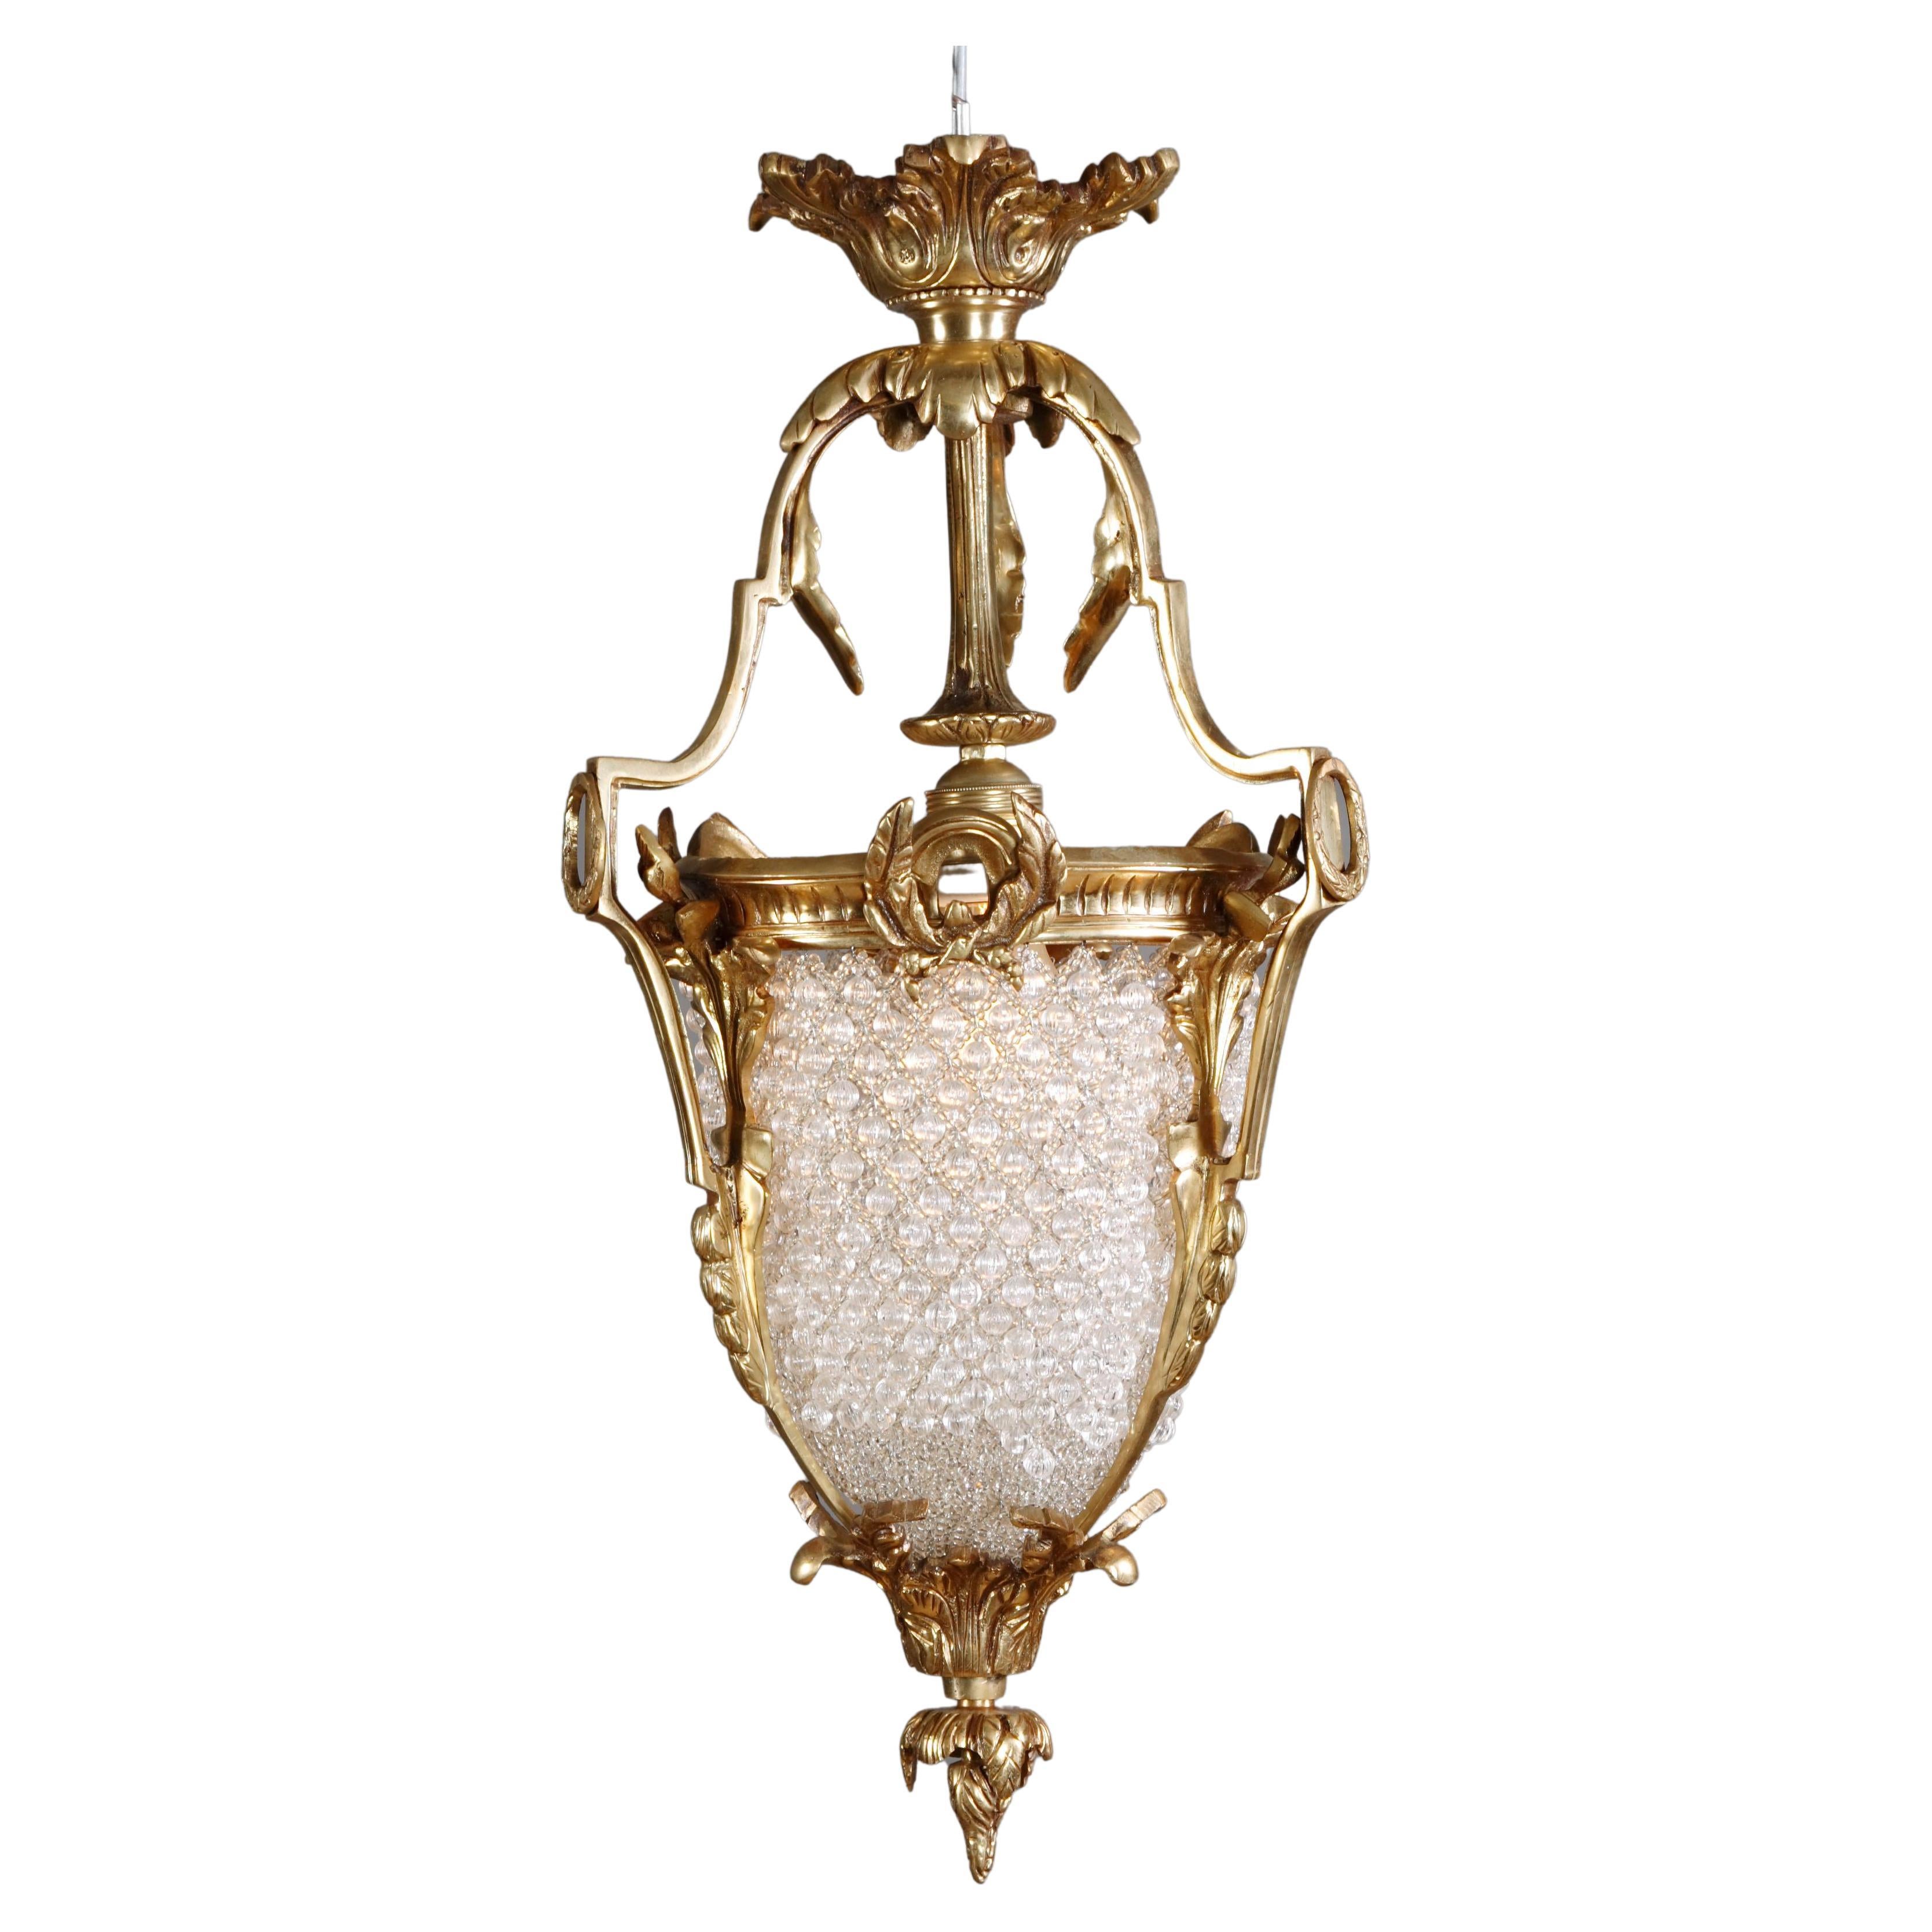 20th Century Louis XVI Style Ceiling Candelabra / Chandelier For Sale